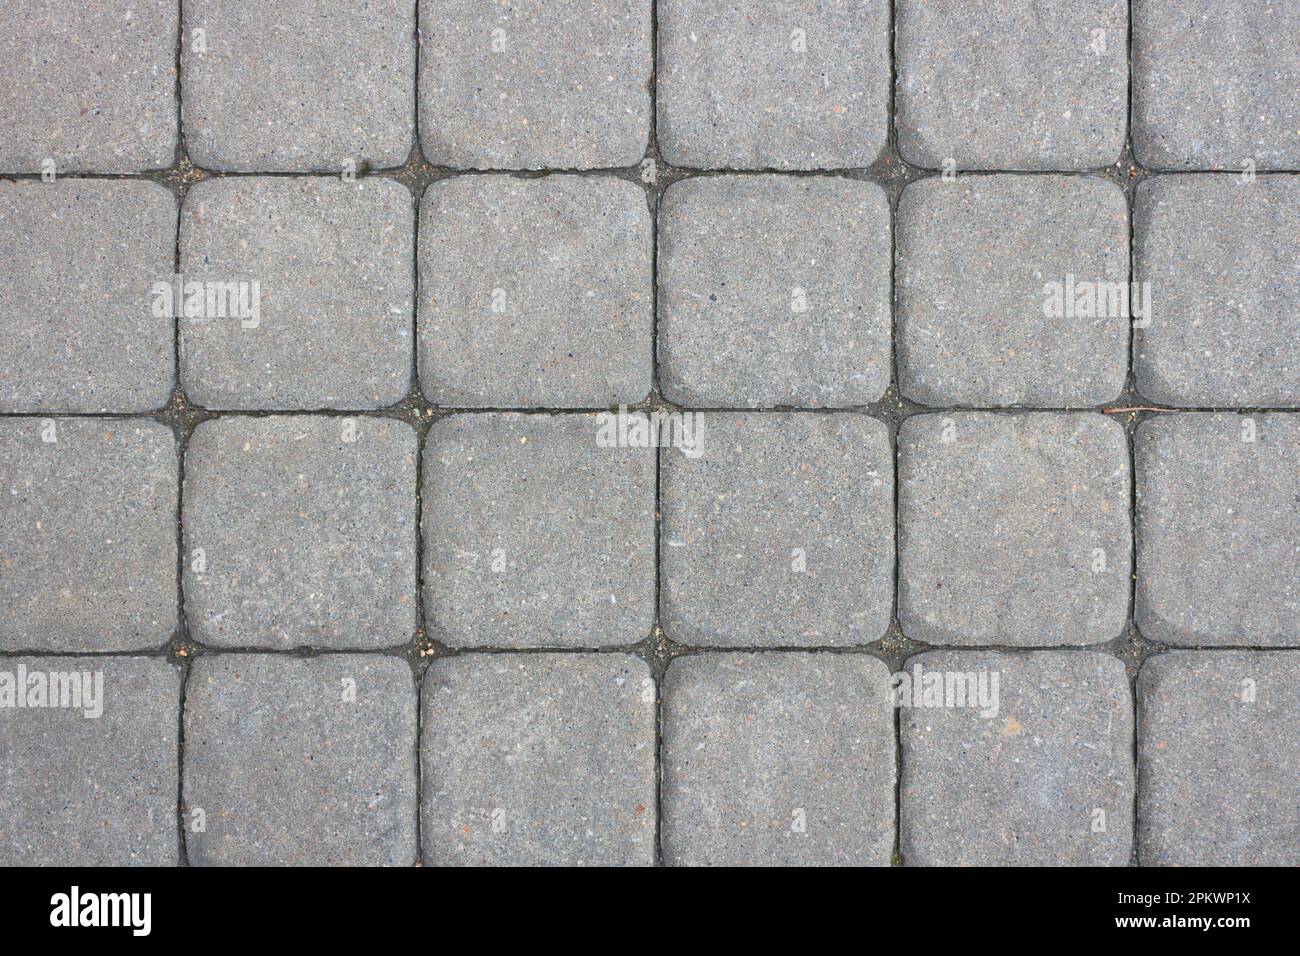 Pavement gray square tiles made of concrete with rounded edges as a background. Stock Photo